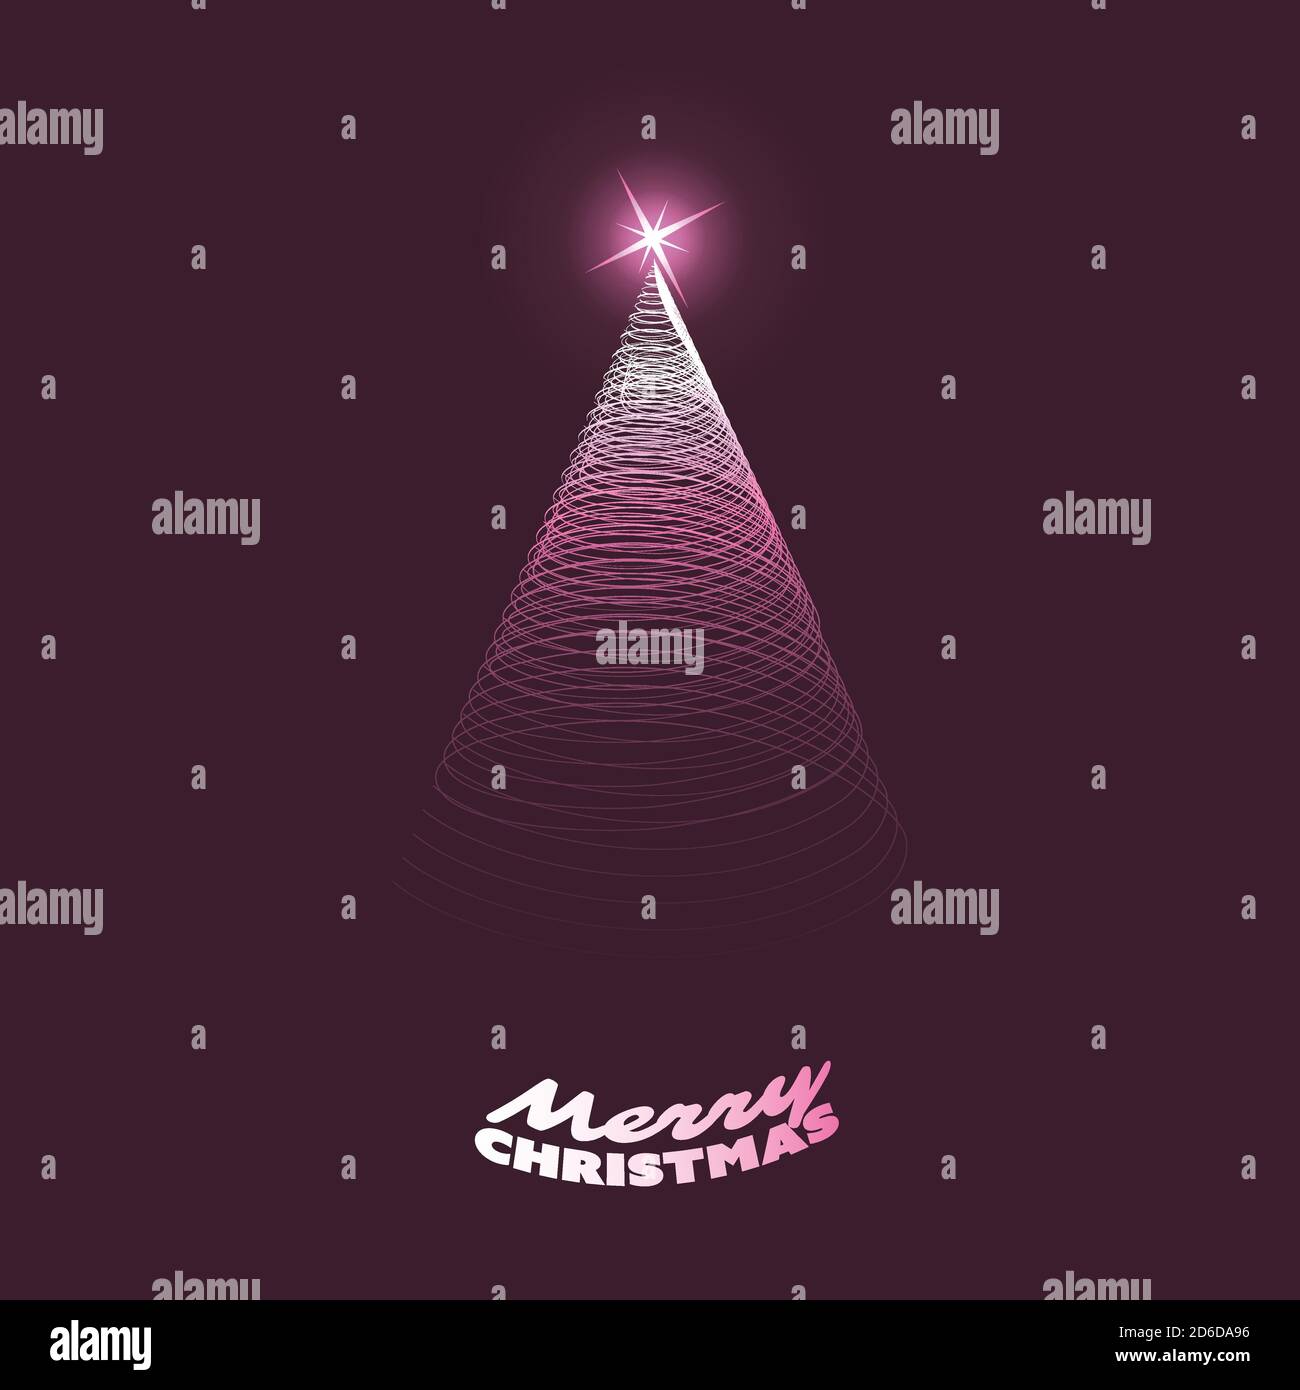 Dark Merry Christmas Card - Light Cone Shaped Christmas Tree with Spiraling Outlines Stock Vector